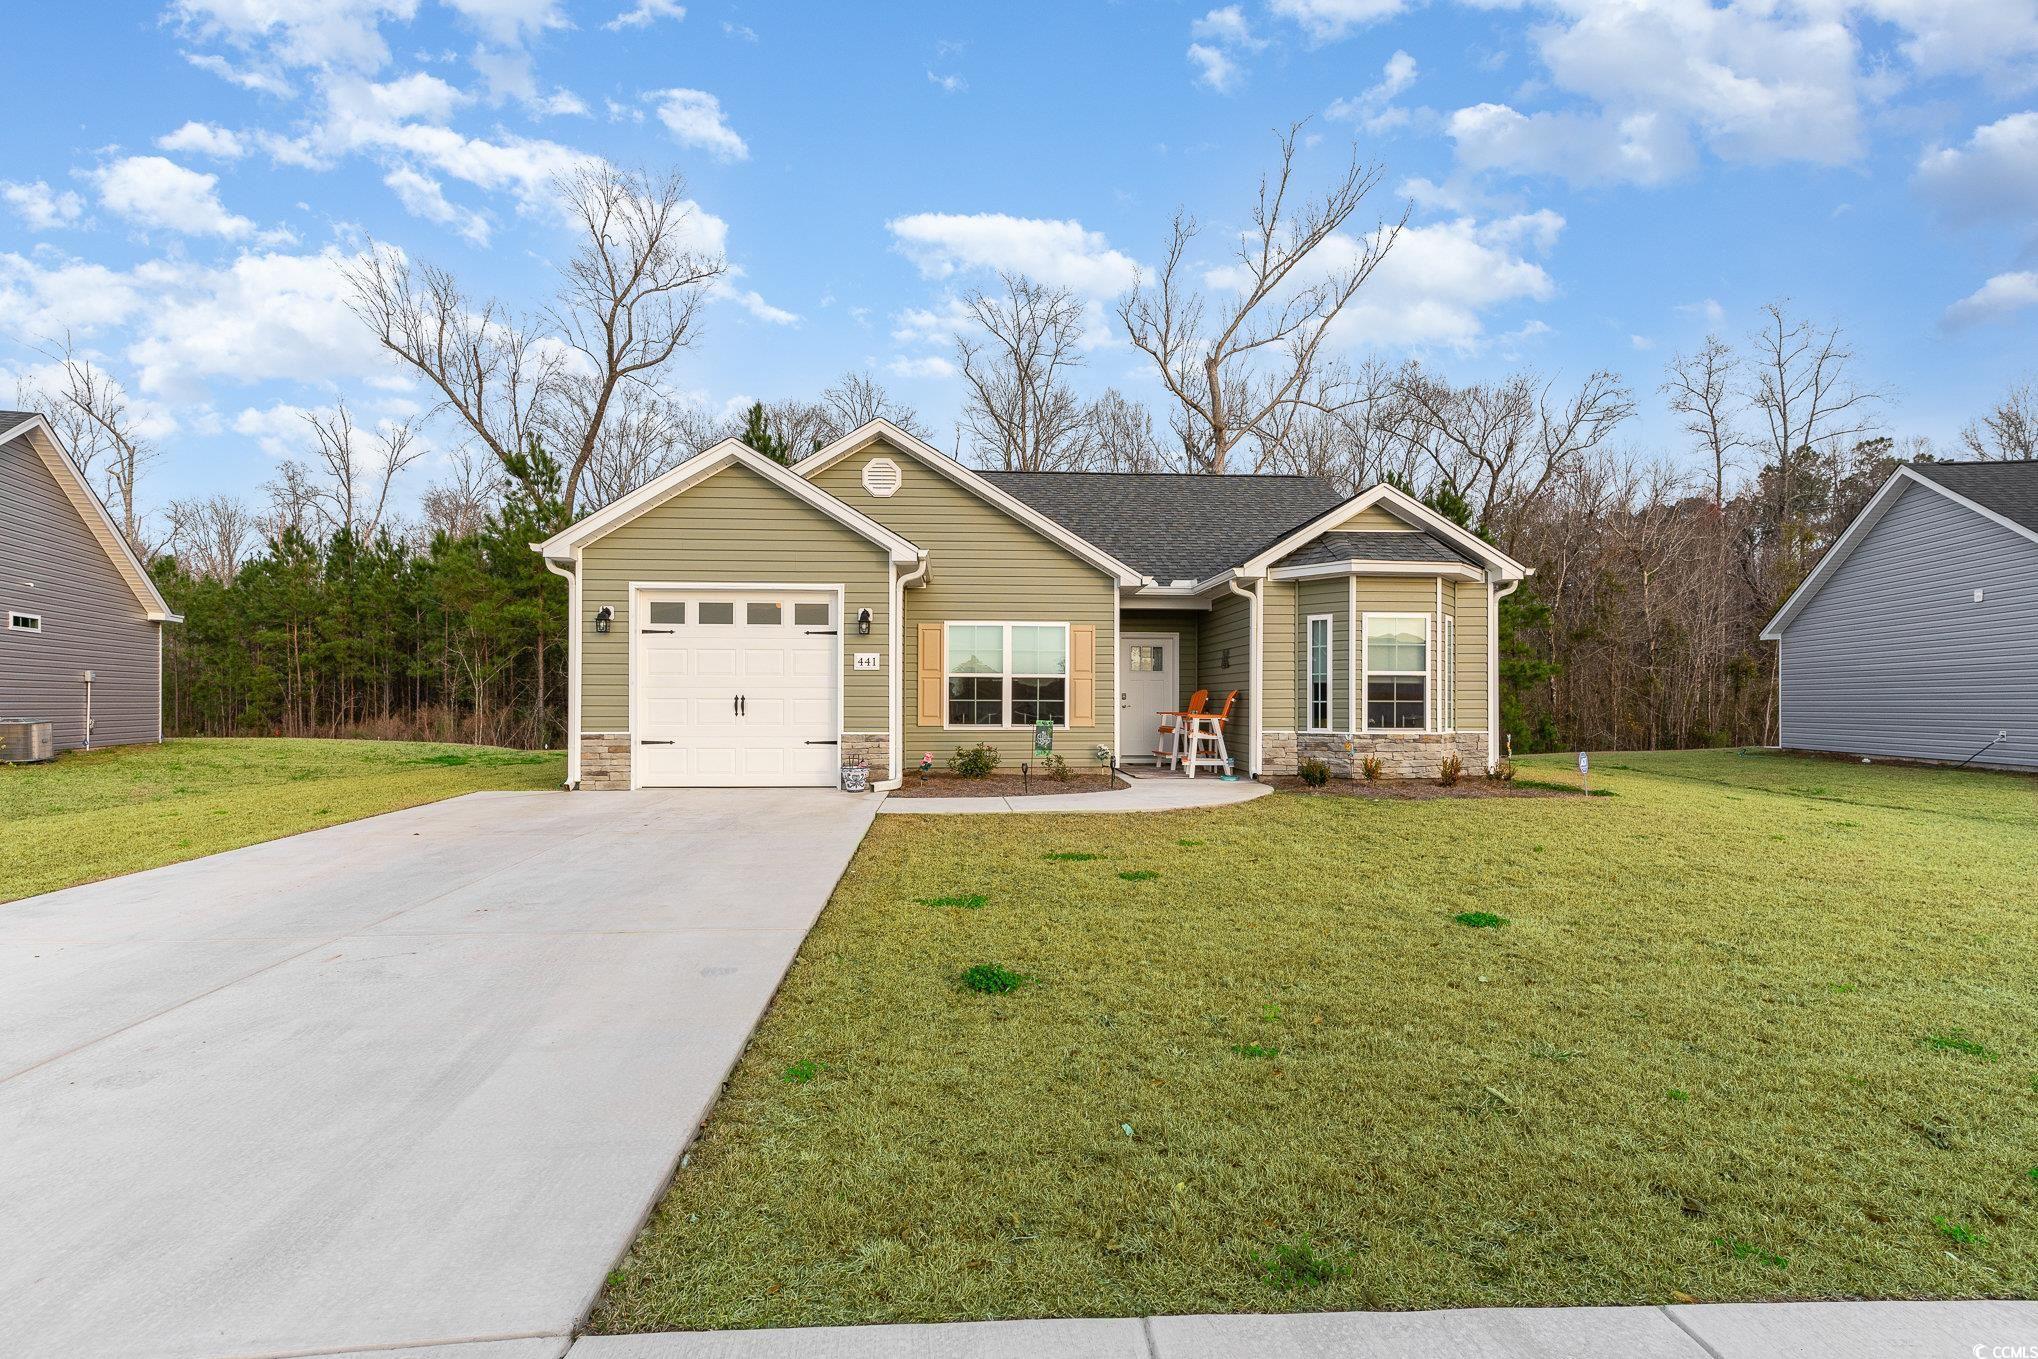 Photo one of 441 Shallow Cove Dr. Conway SC 29527 | MLS 2405439